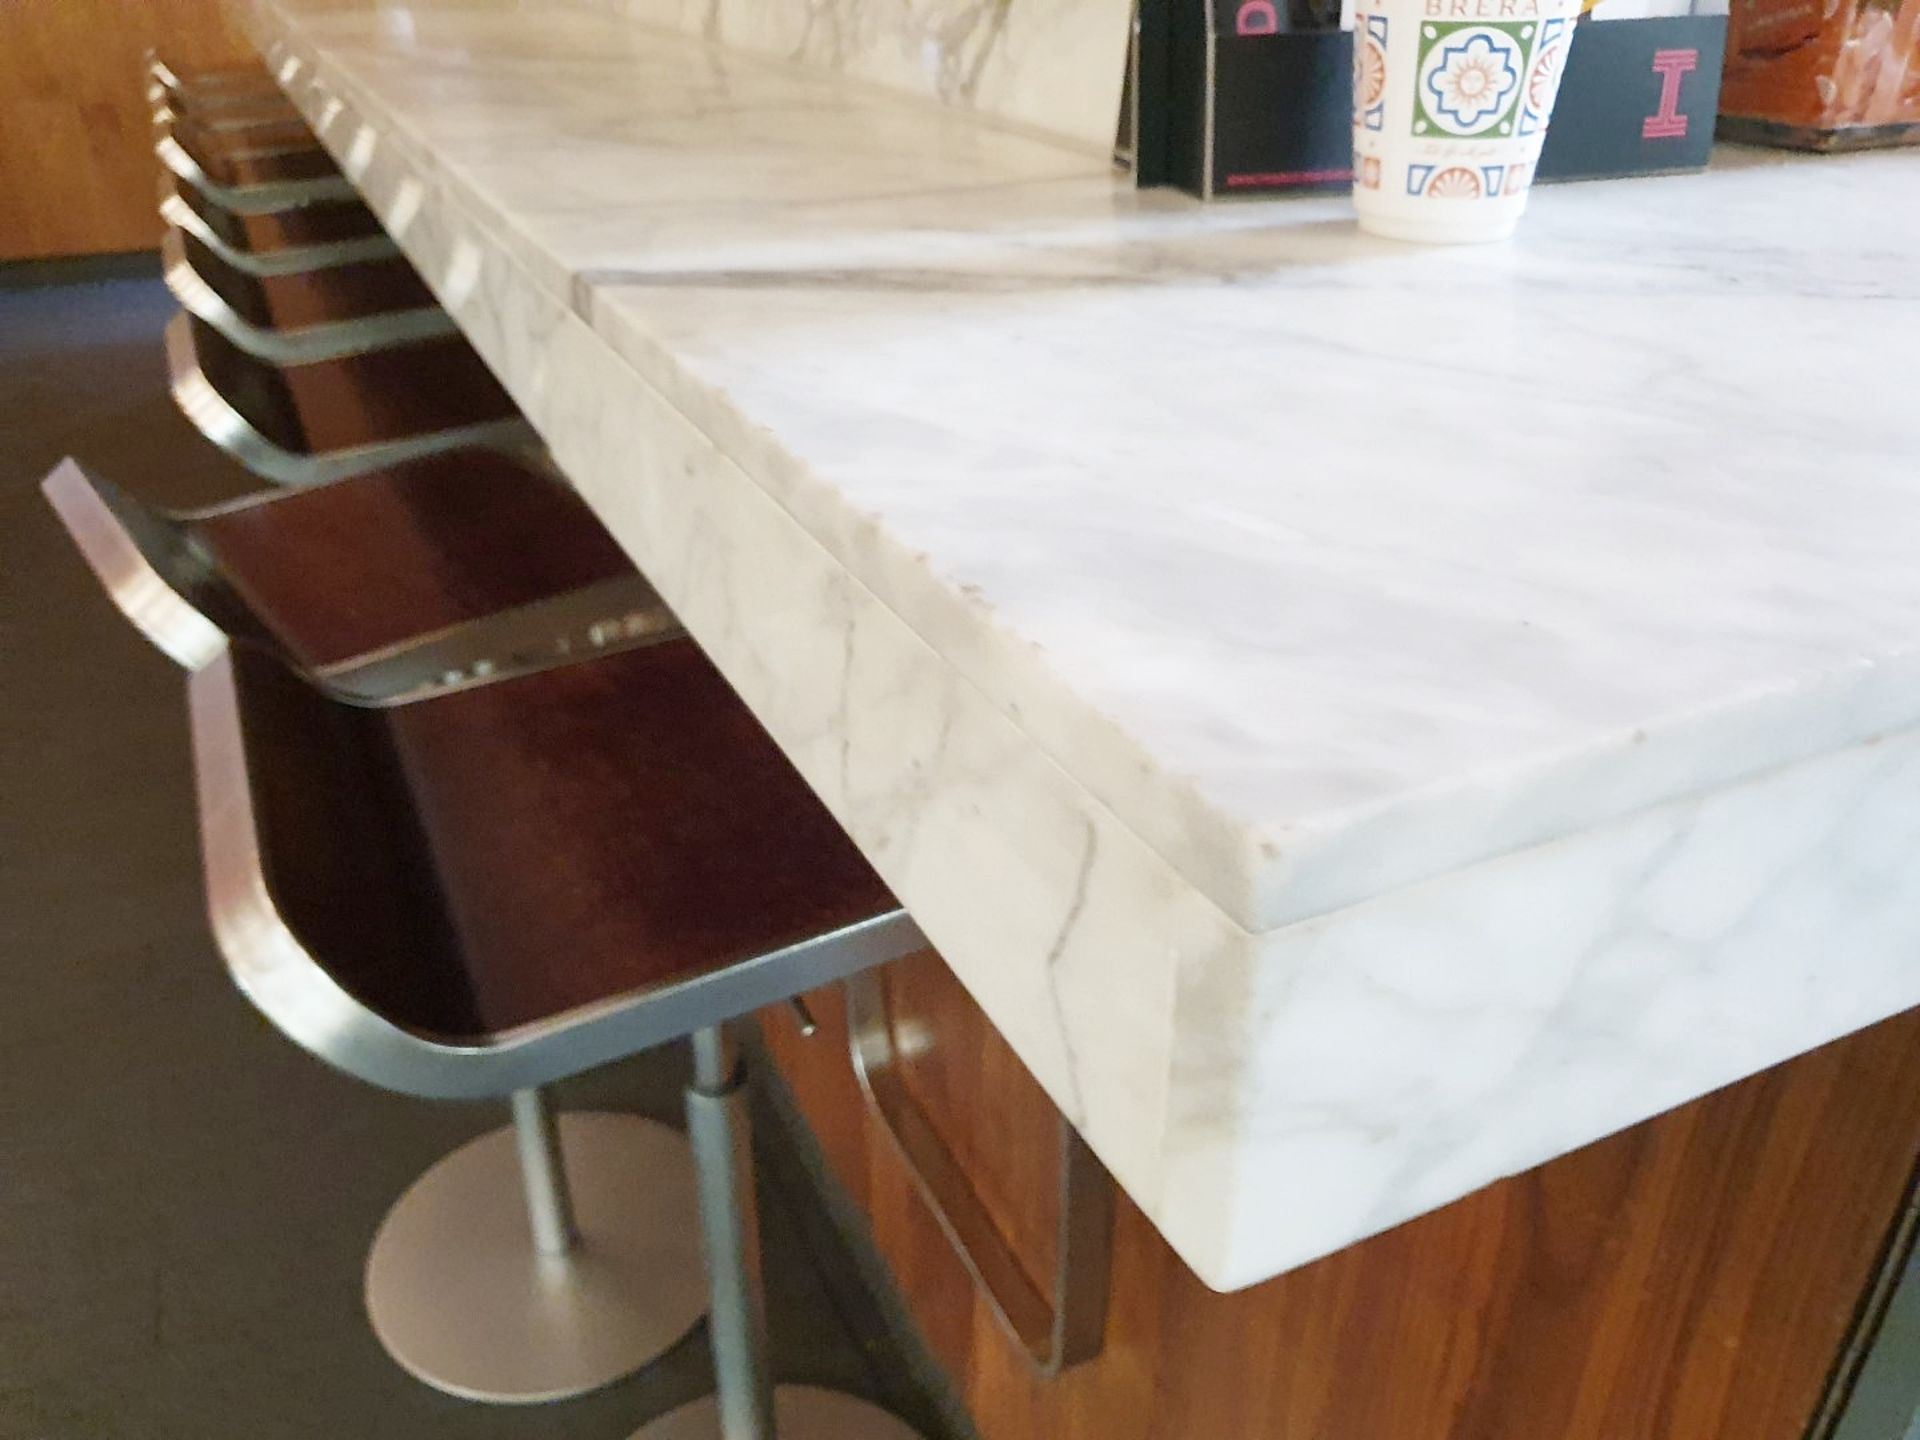 1 x White Marble/Granite Breakfast / Coffee Bar Central with Server station - Three piece - Ref: - Image 4 of 6